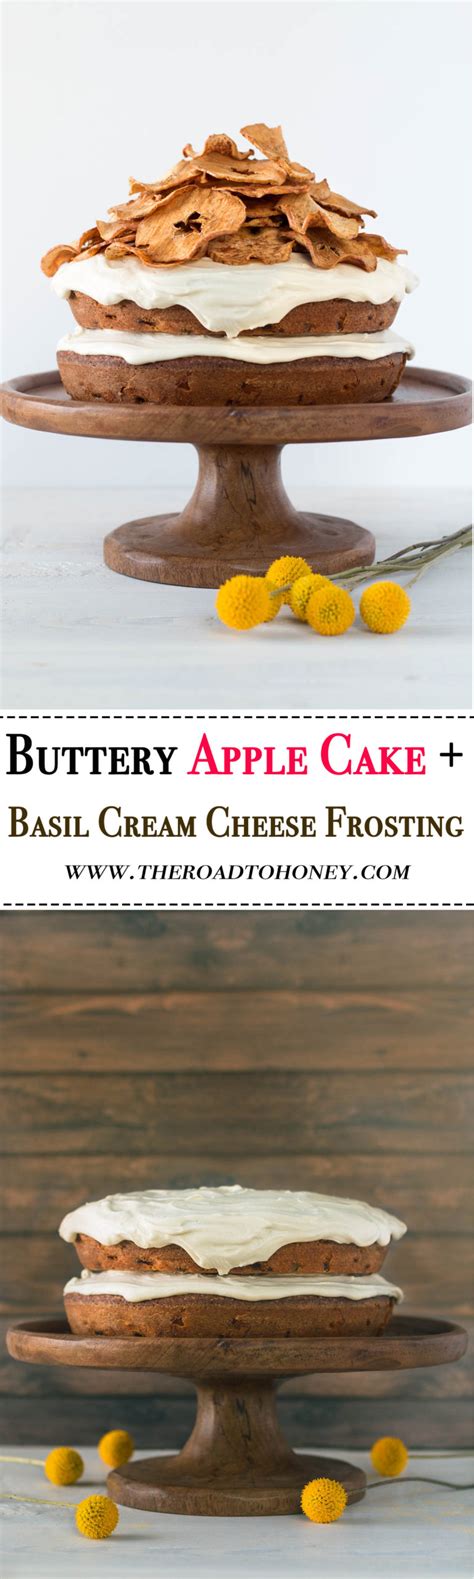 Buttery Apple Cake With Basil Cream Cheese Frosting And Apple Chips